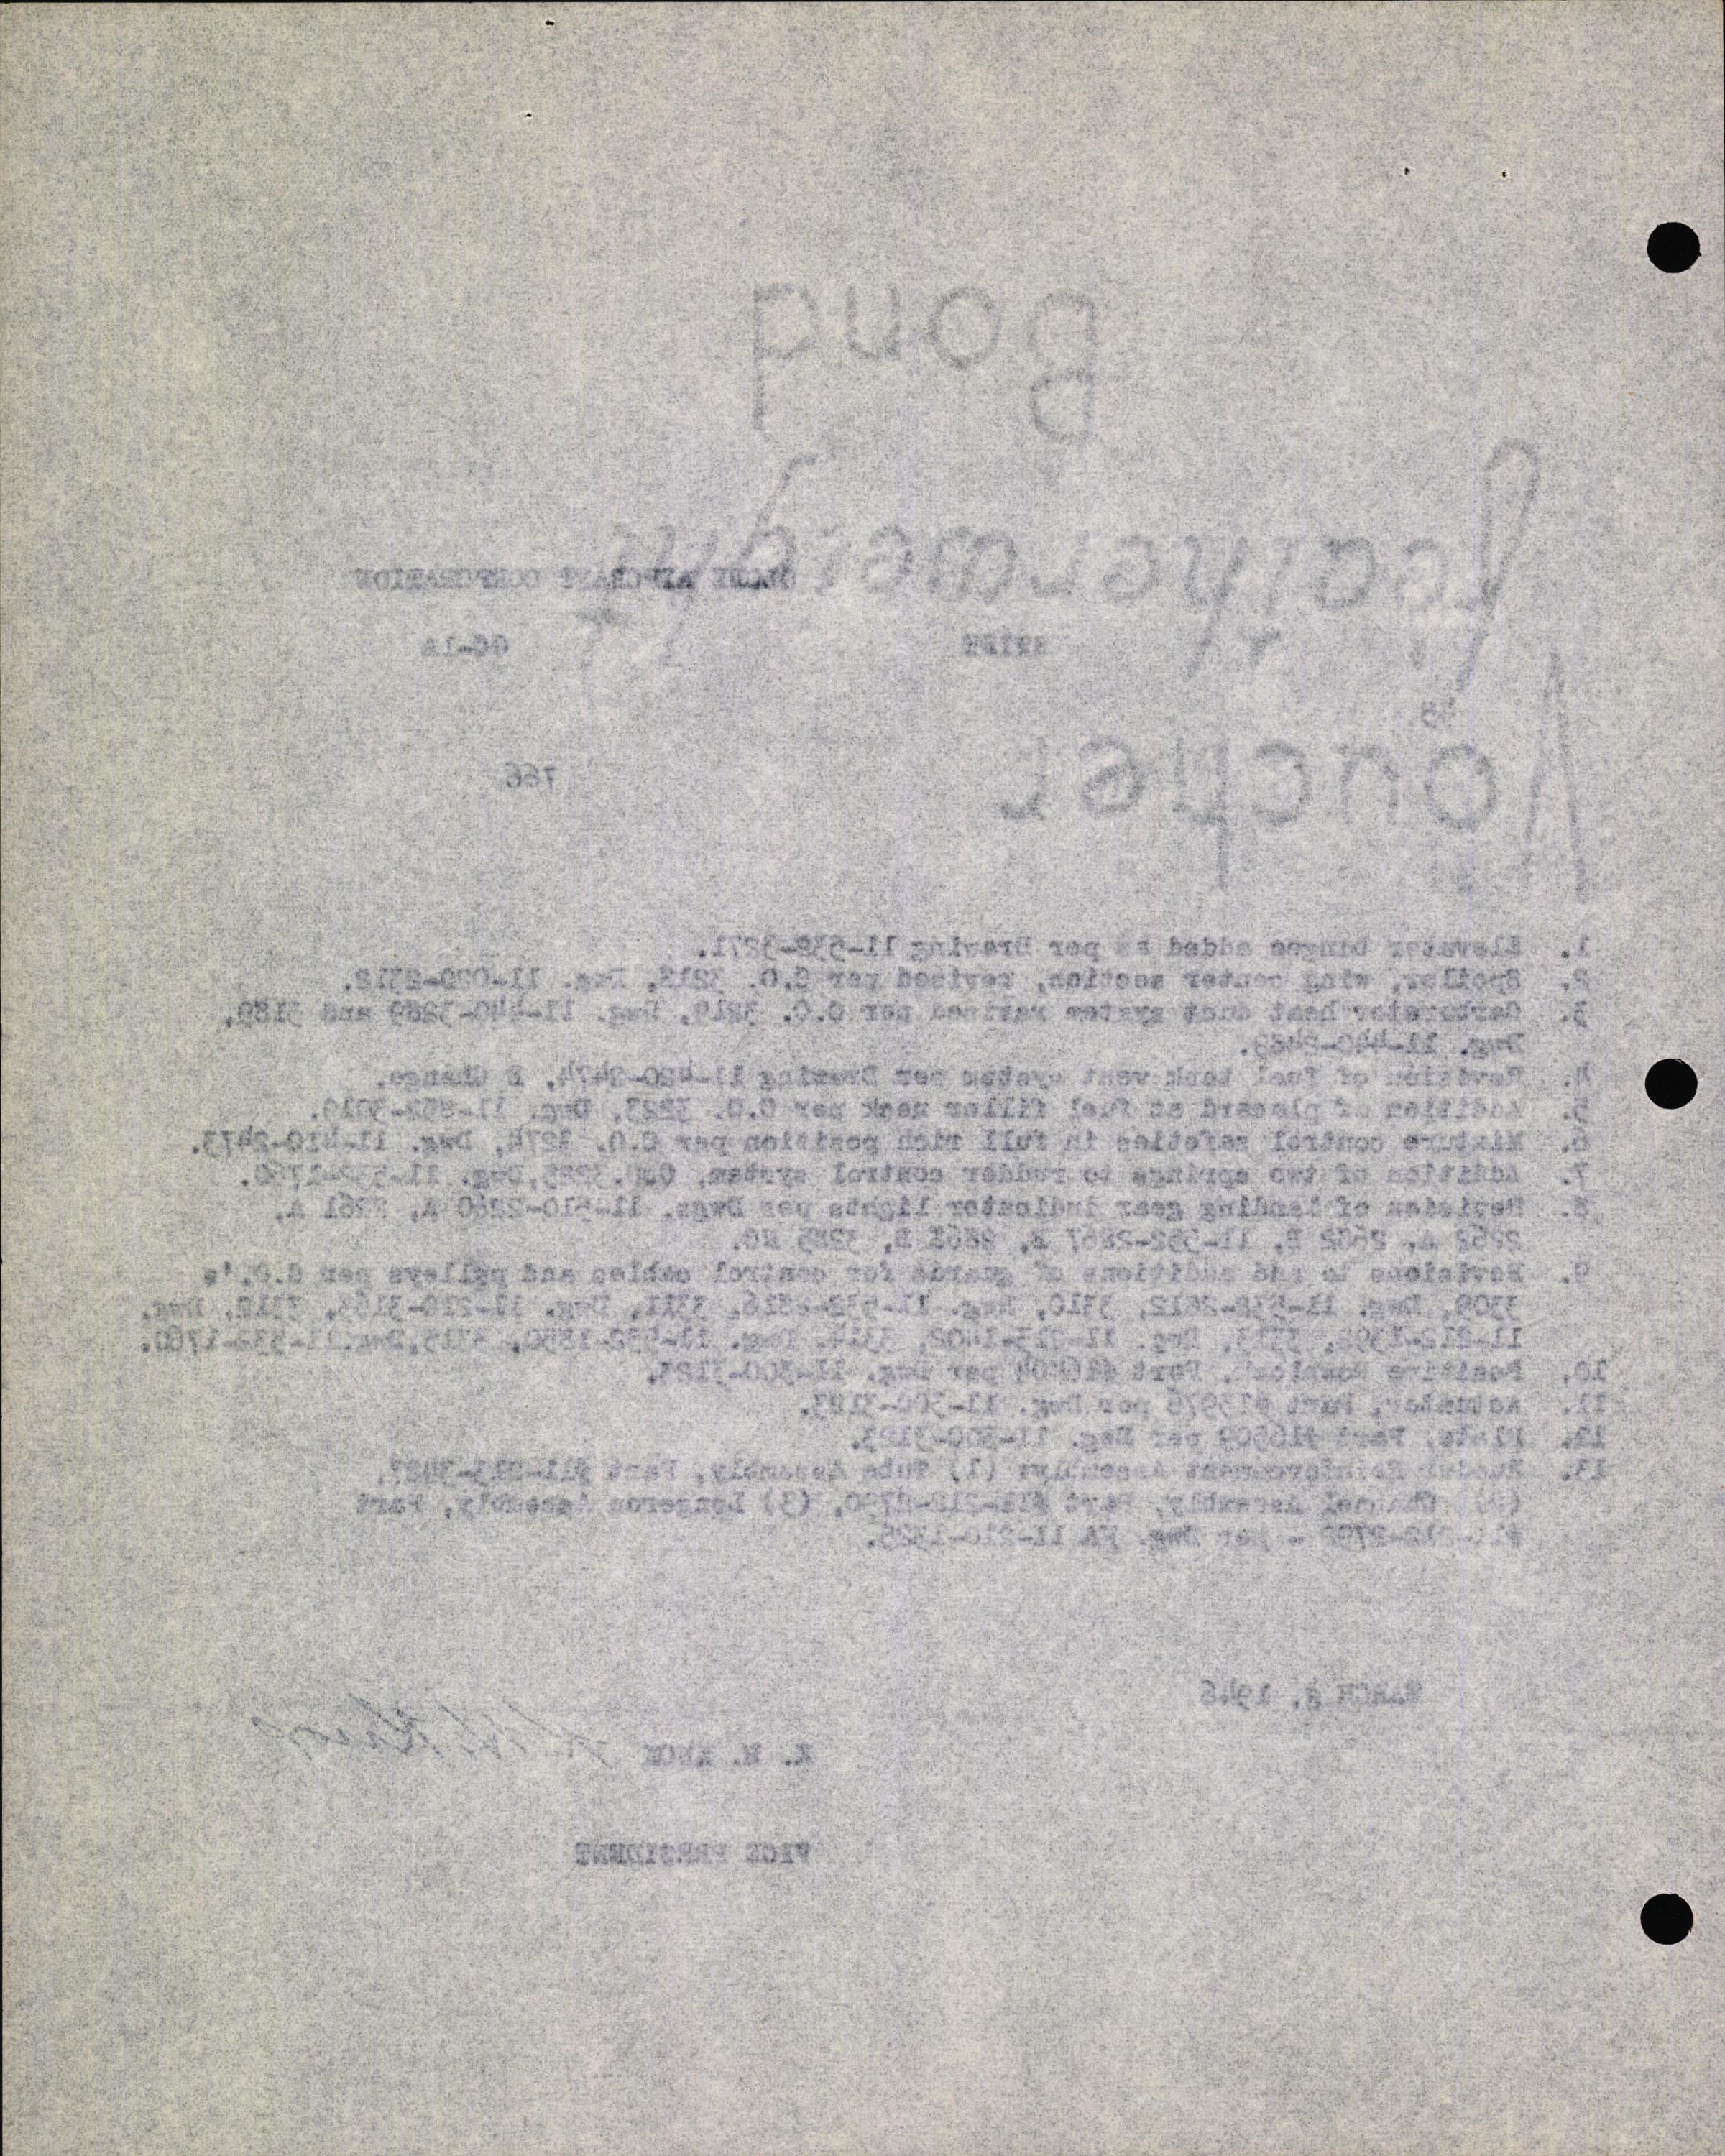 Sample page 8 from AirCorps Library document: Technical Information for Serial Number 45